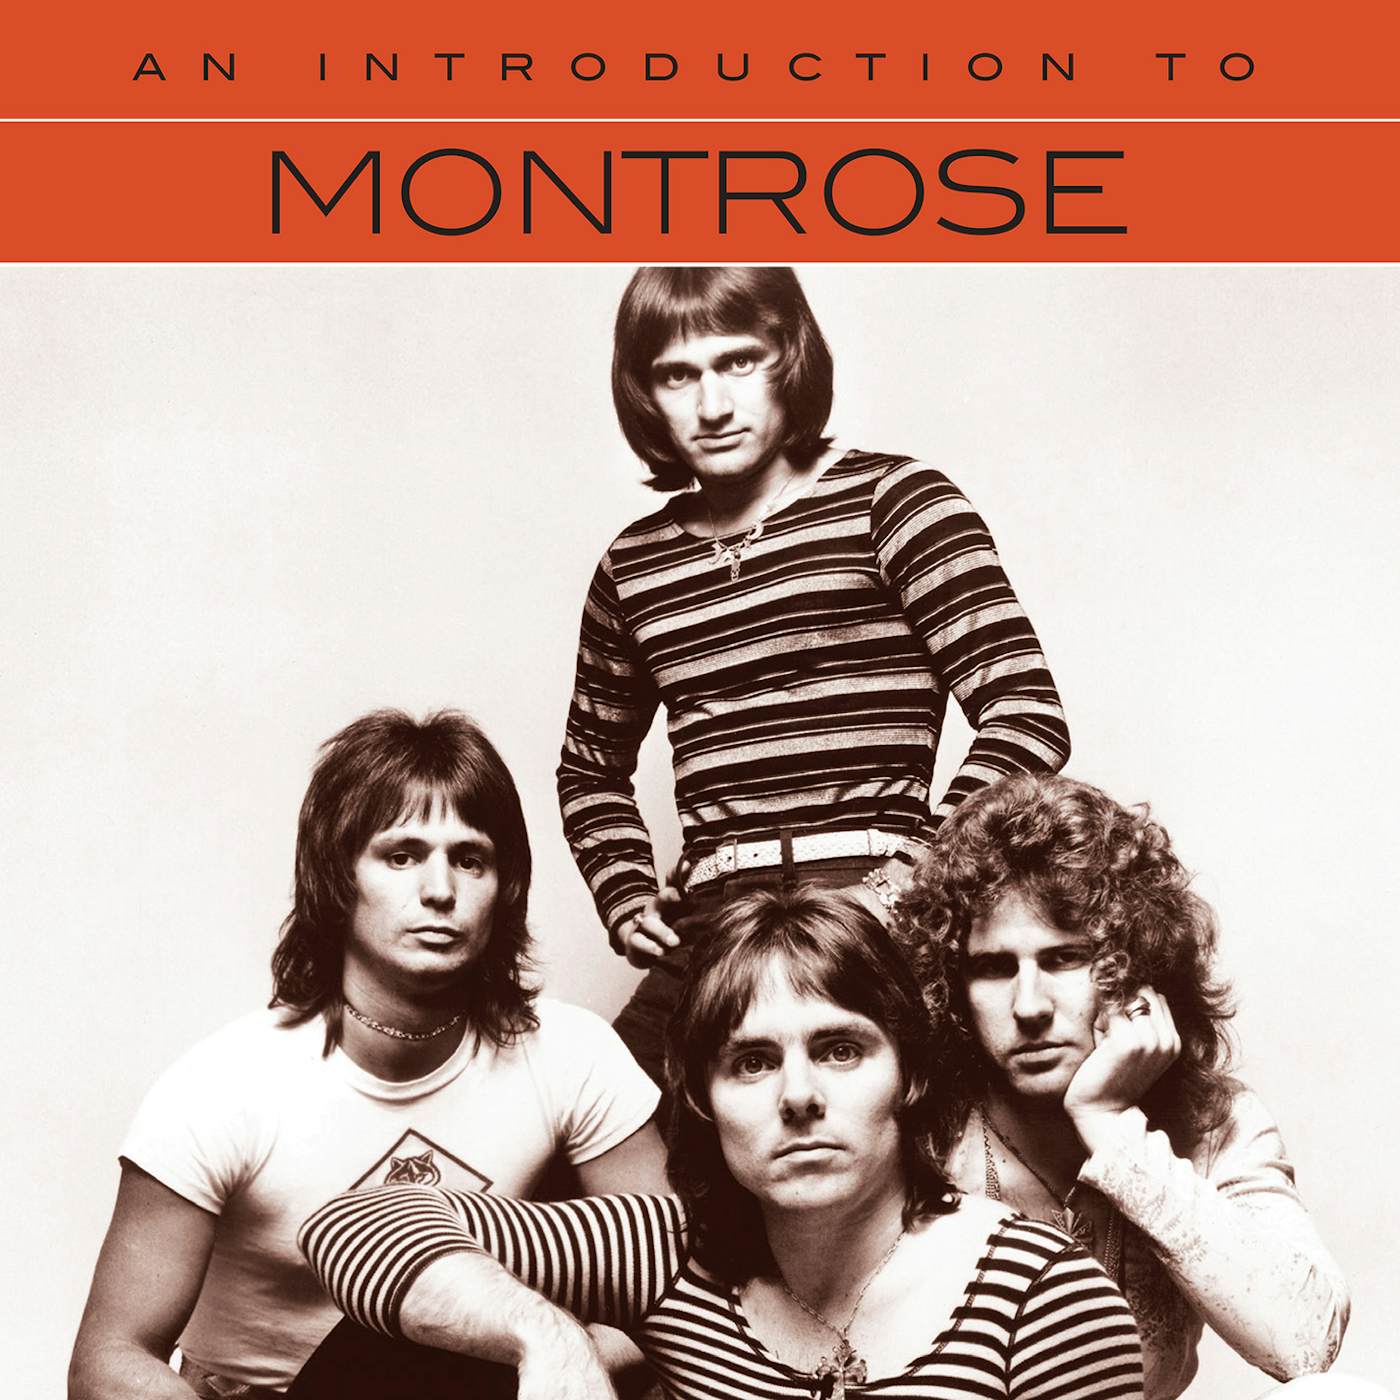 Montrose AN INTRODUCTION TO CD